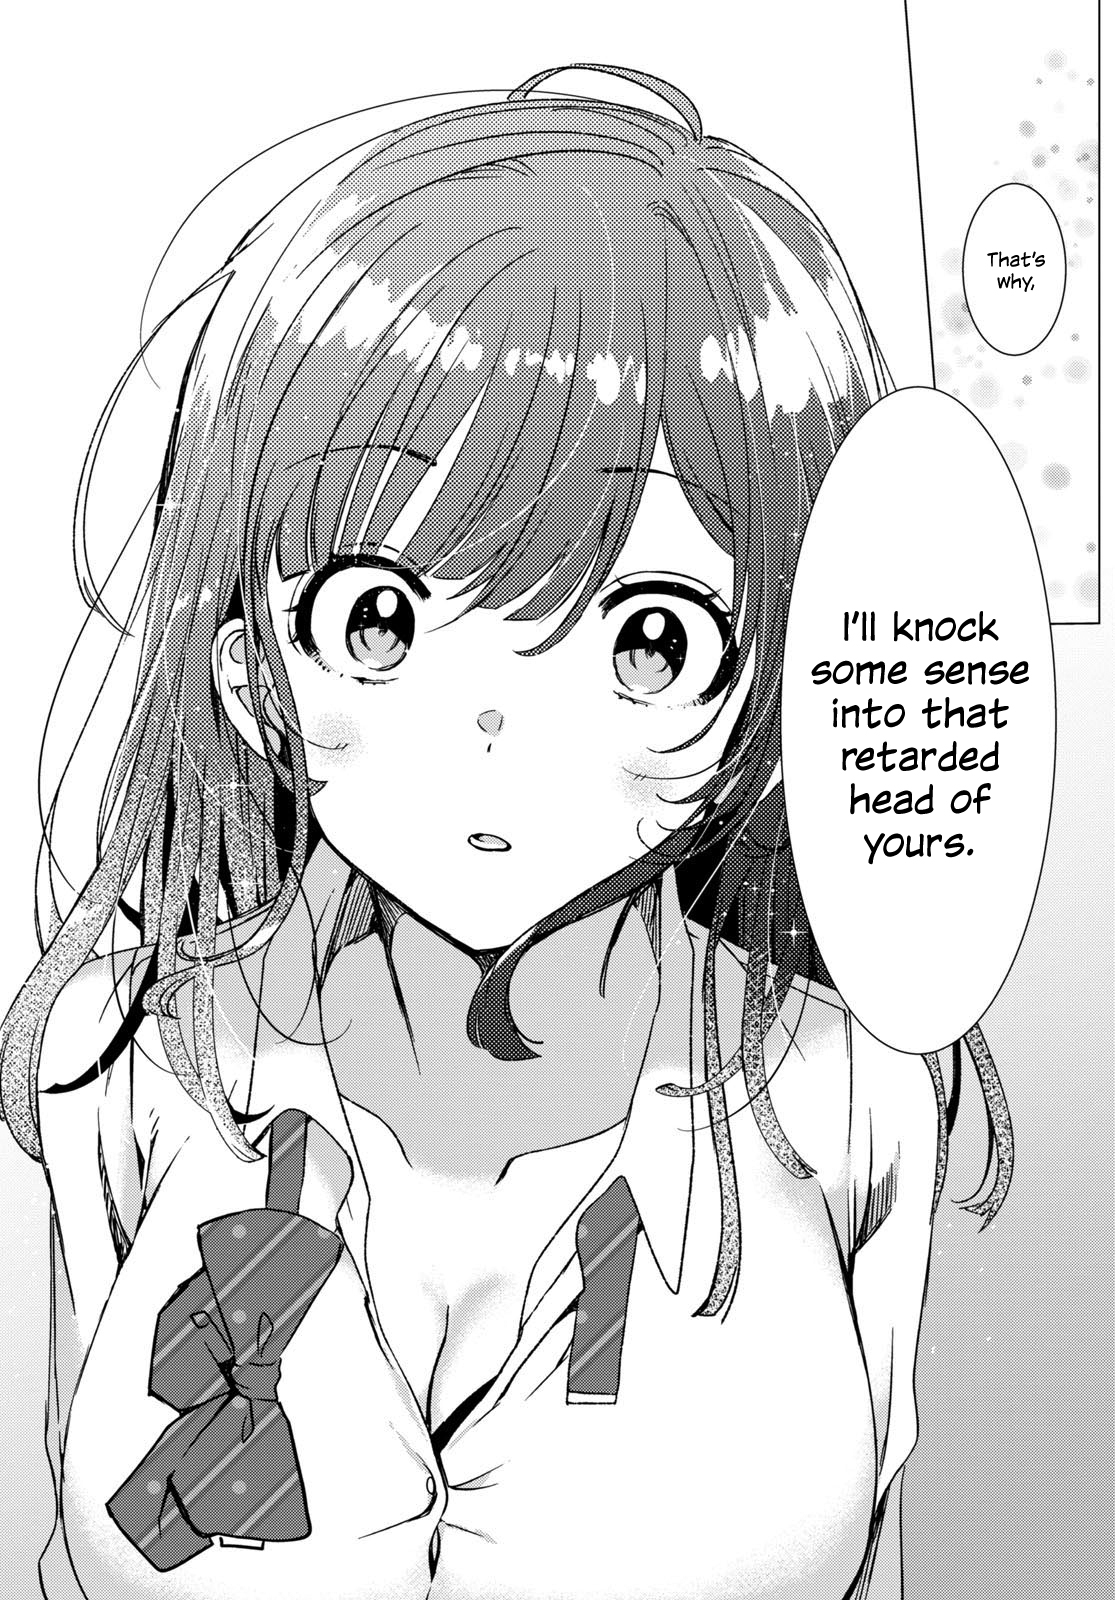 I Shaved. Then I Brought a High School Girl Home. Ch. 1